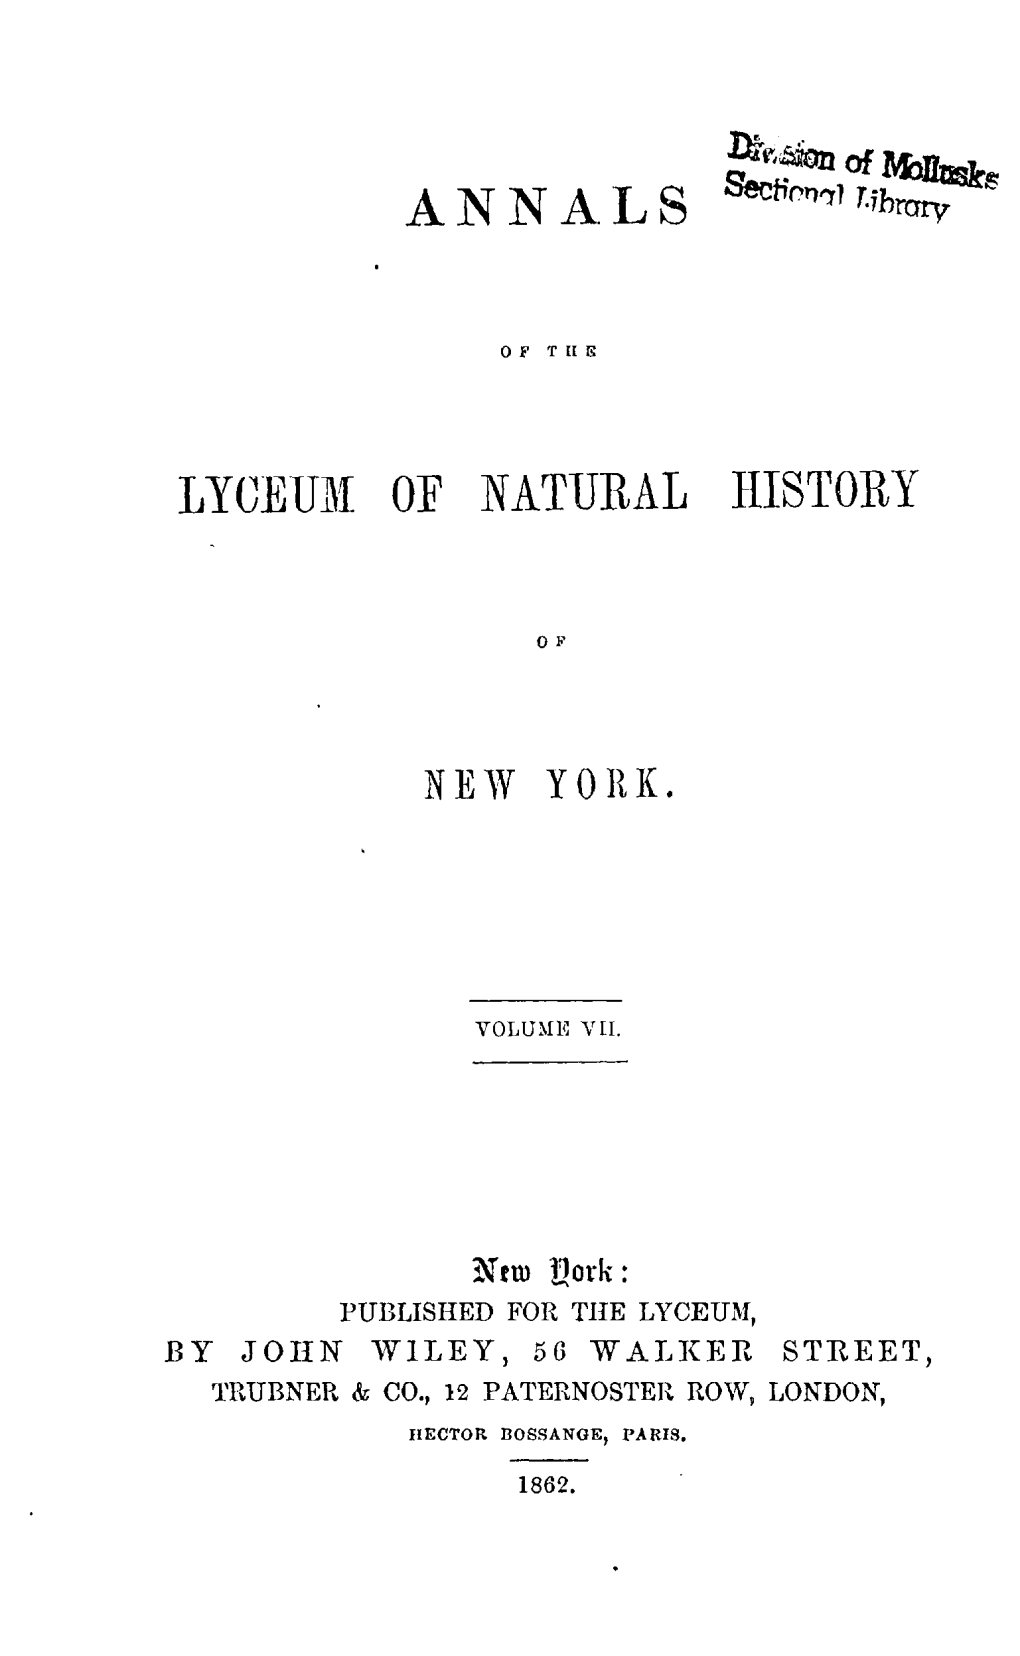 ANNALS ^"^Mtv LYCEUM of NATURAL HISTORY